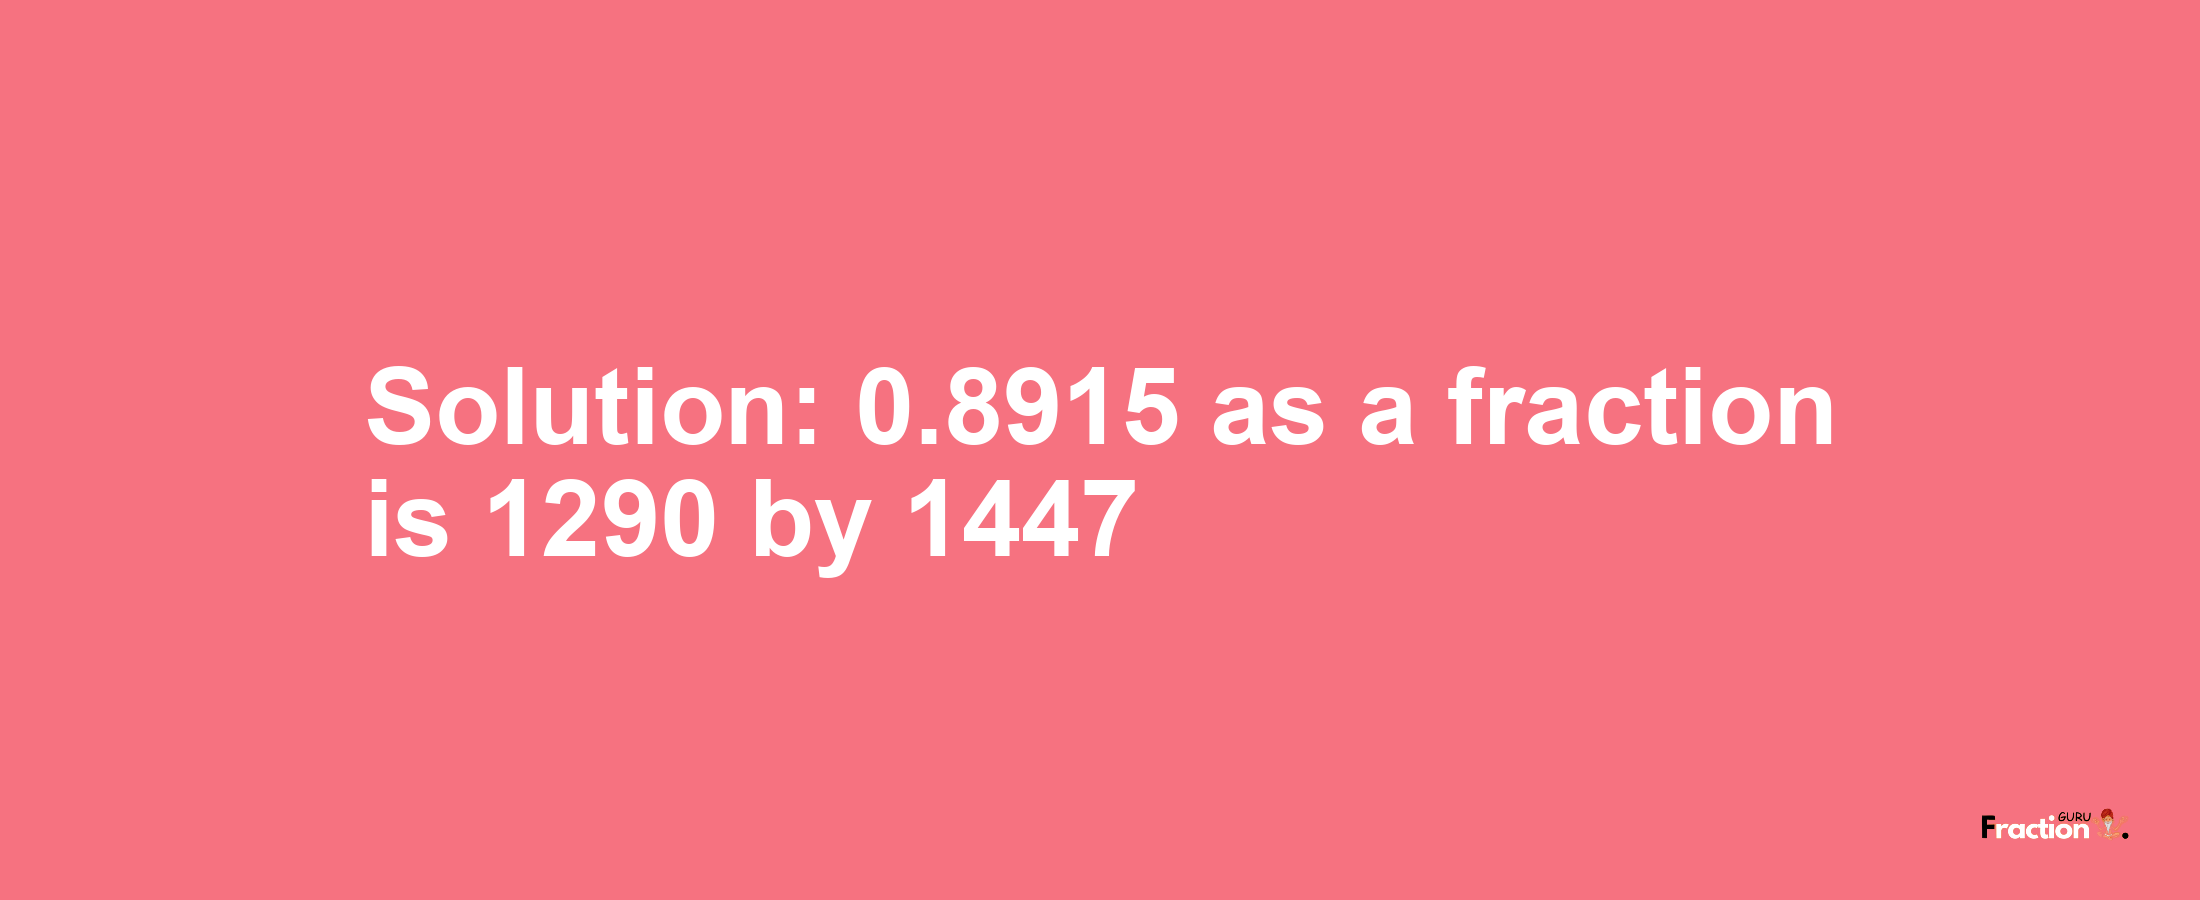 Solution:0.8915 as a fraction is 1290/1447